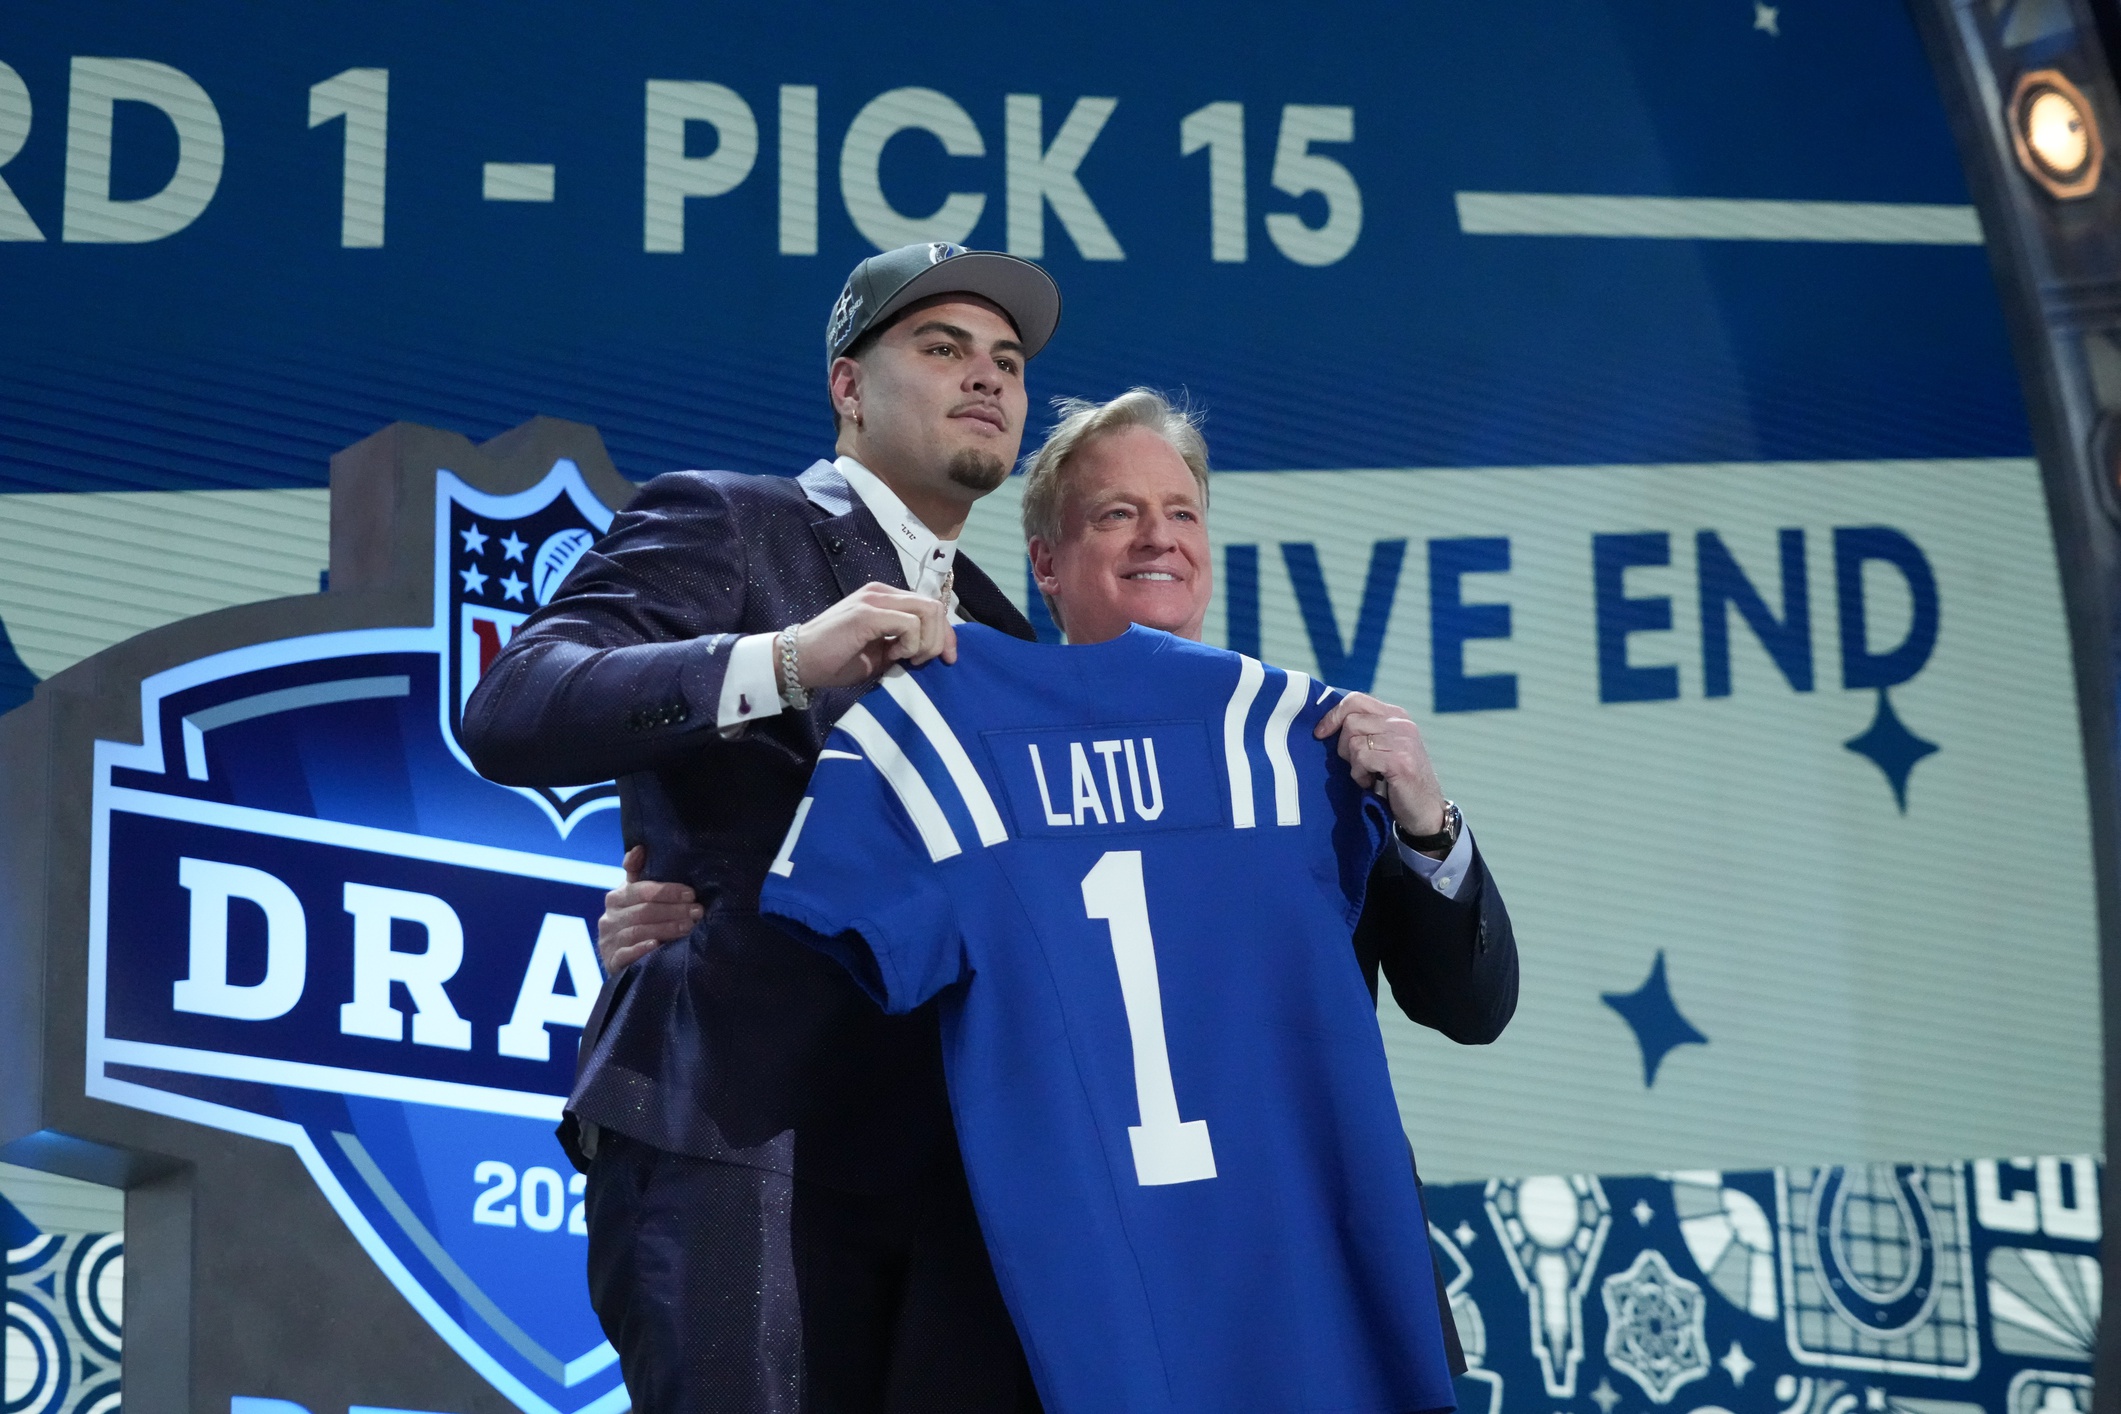 Can Colts Rookie Be Best Pass-Rusher Since Freeney/Mathis?